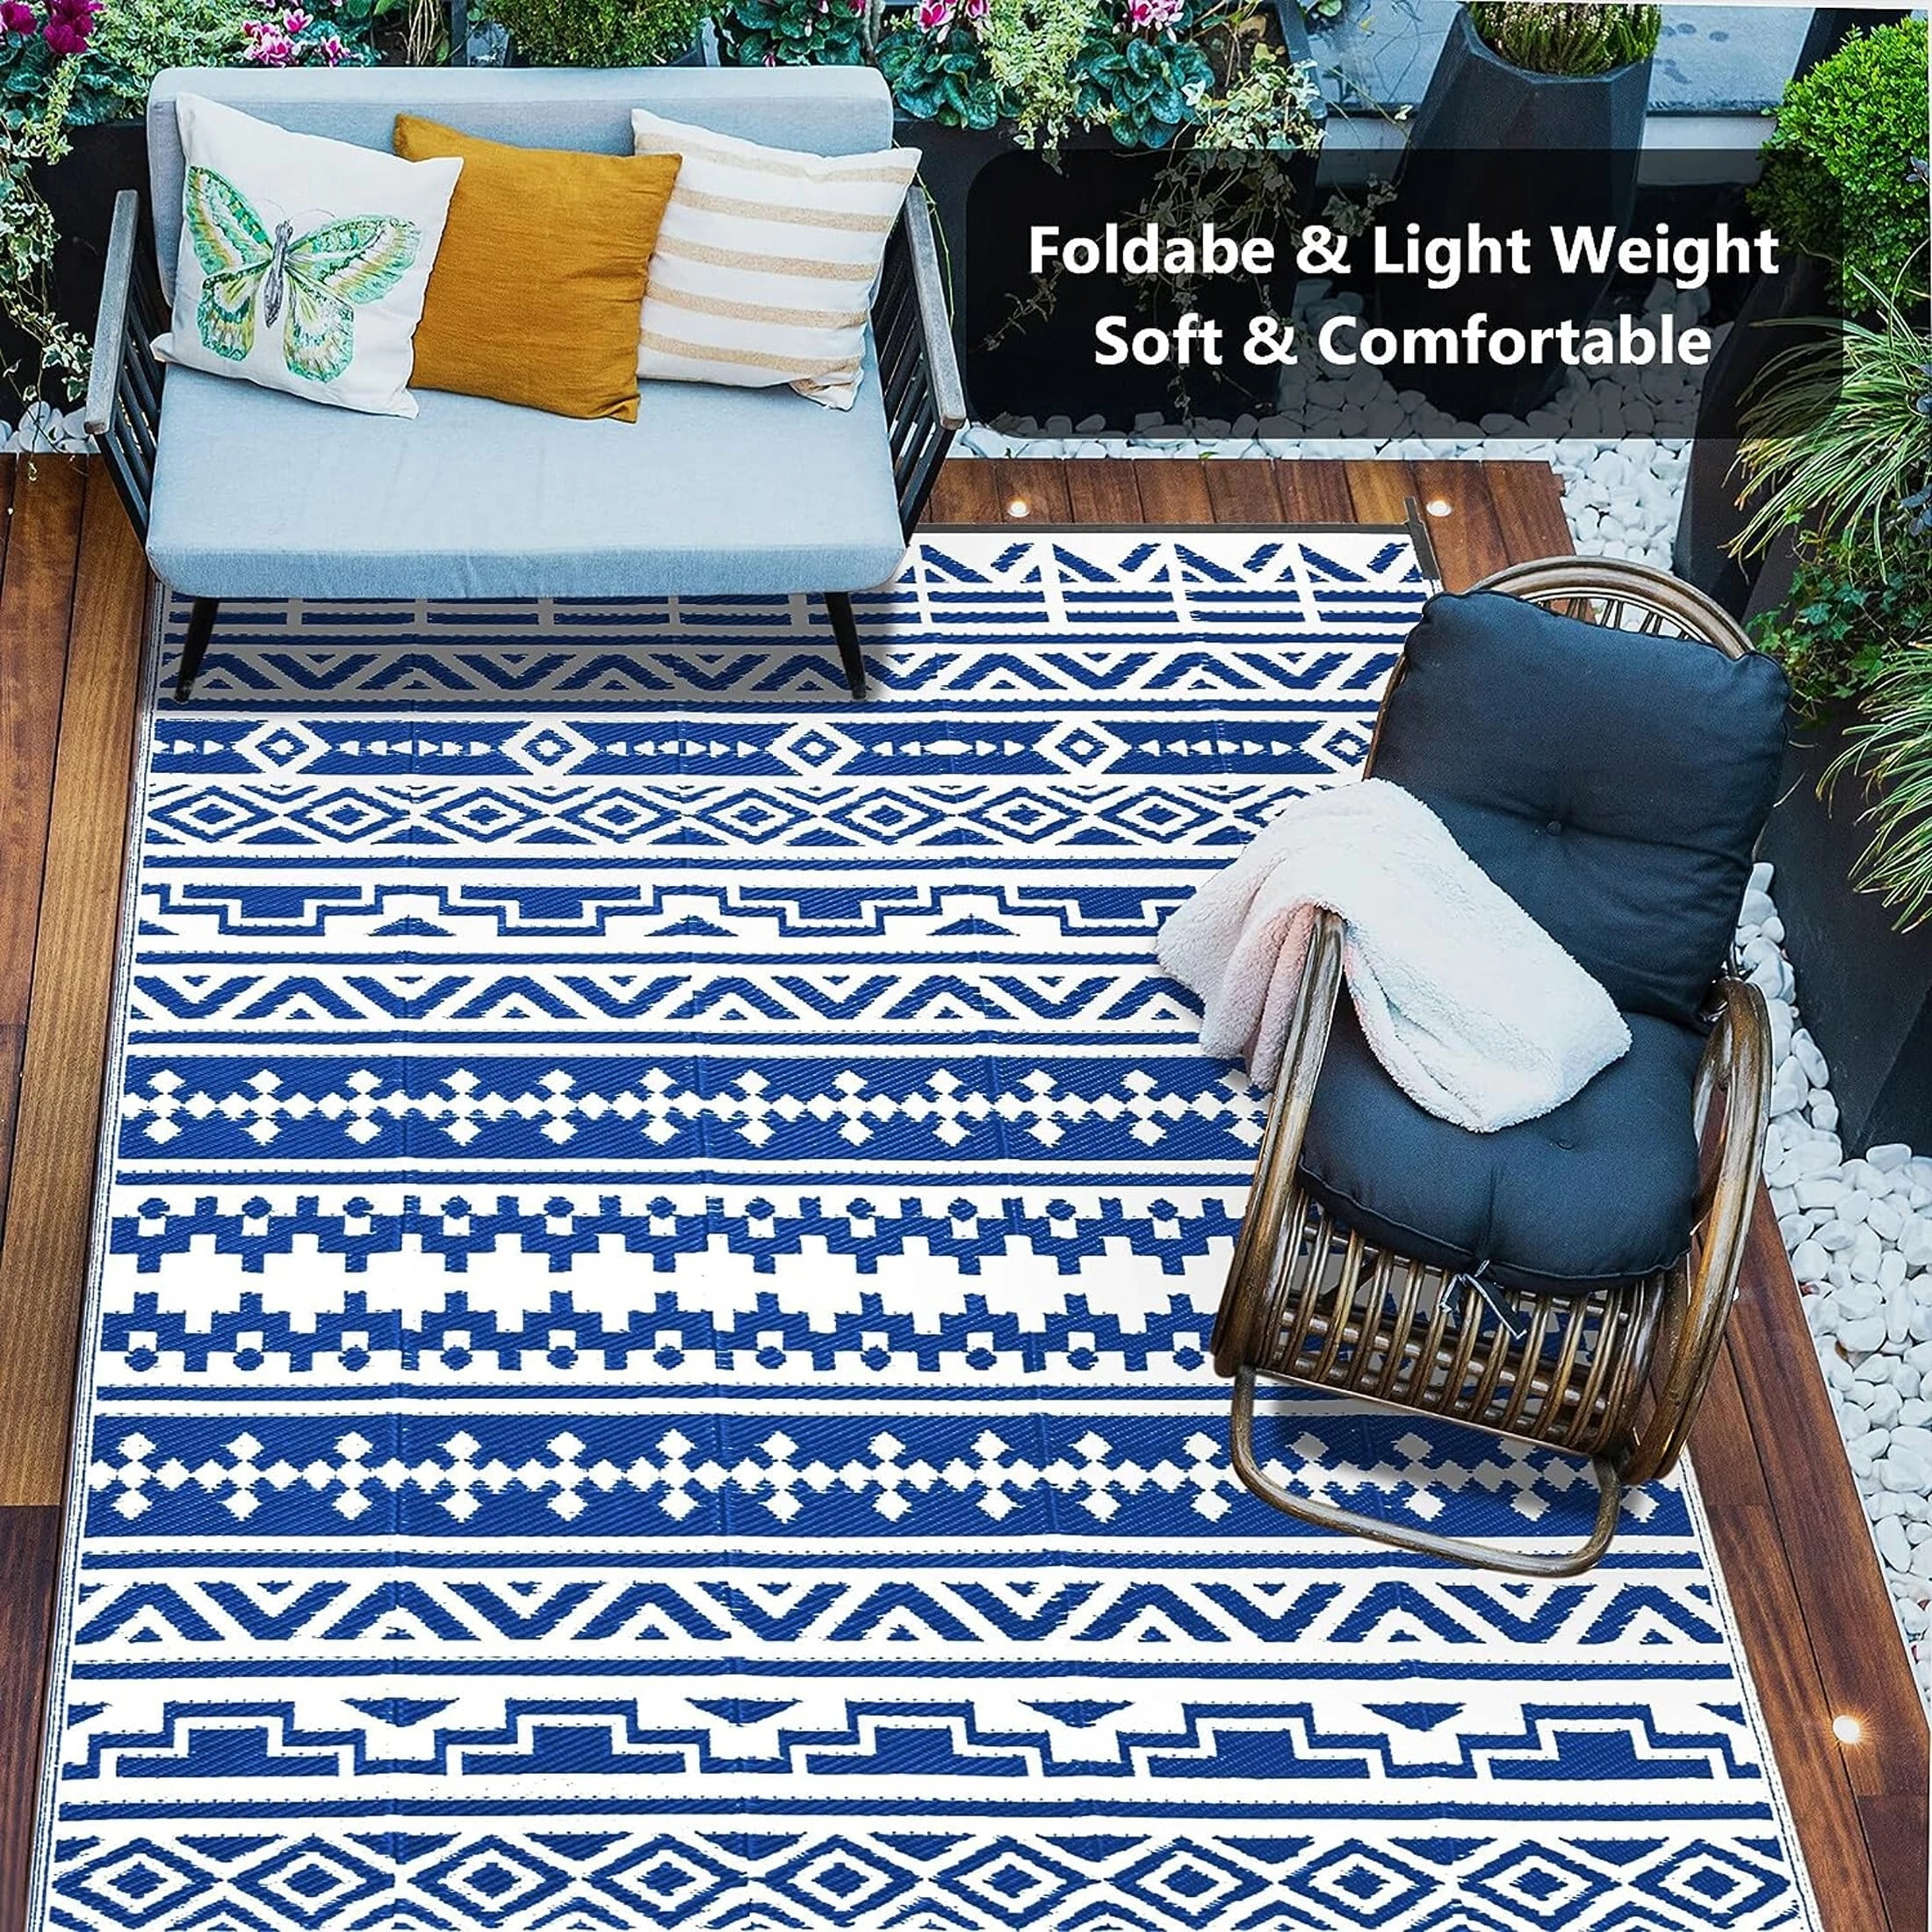 Indoor Outdoor Rugs for Patioft - Reversible Outside Carpet, Stain & UV  Resistant Portable RV Mats, Plastic Straw Rug for Camping, Pool Deck